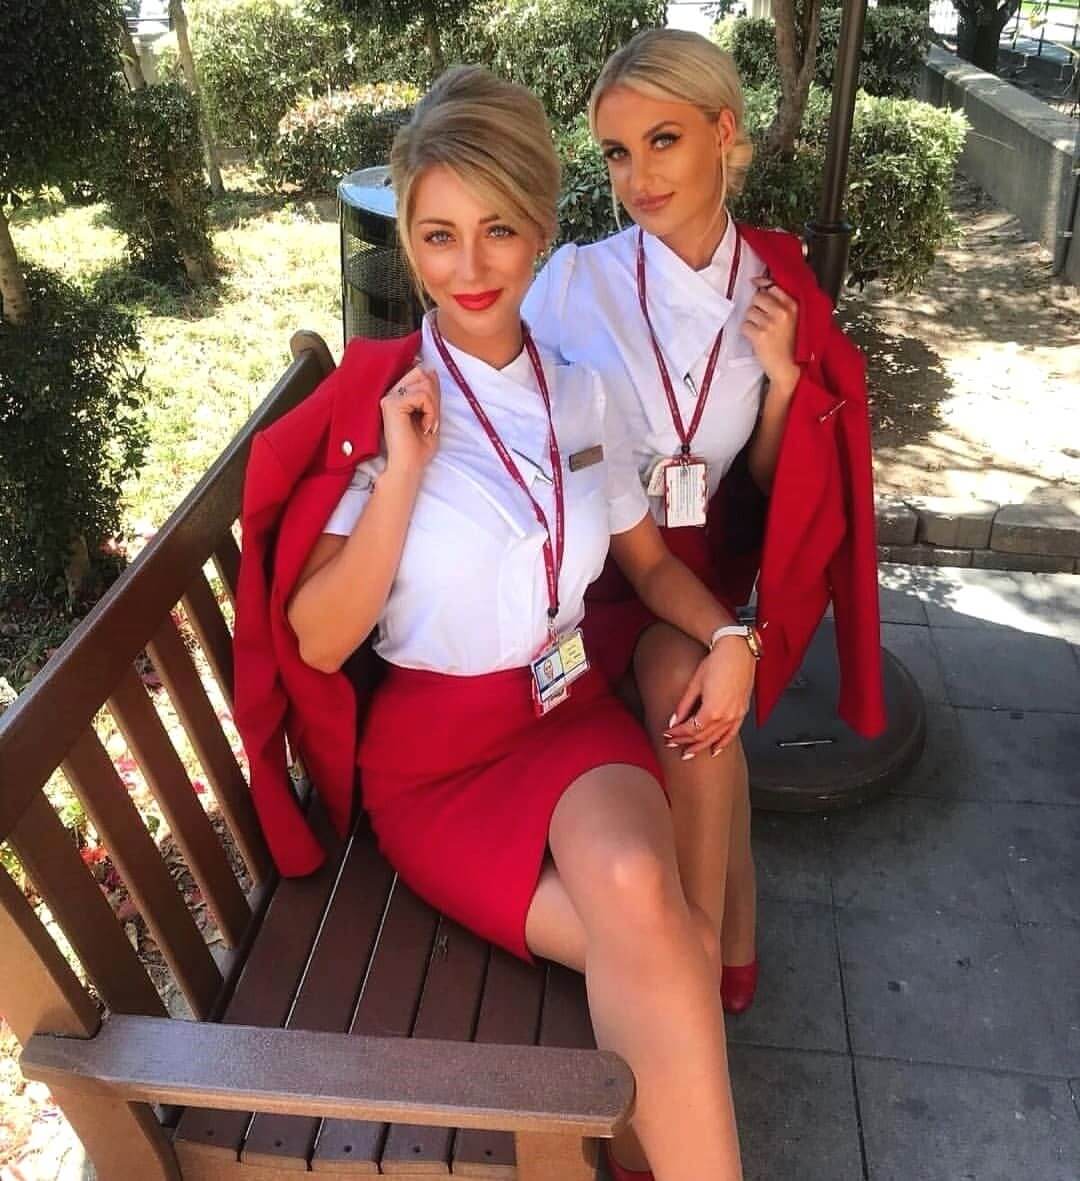 The Shockingly Raunchy Snaps Taken By Some Of Hottest Female Cabin Crew In The World! 25